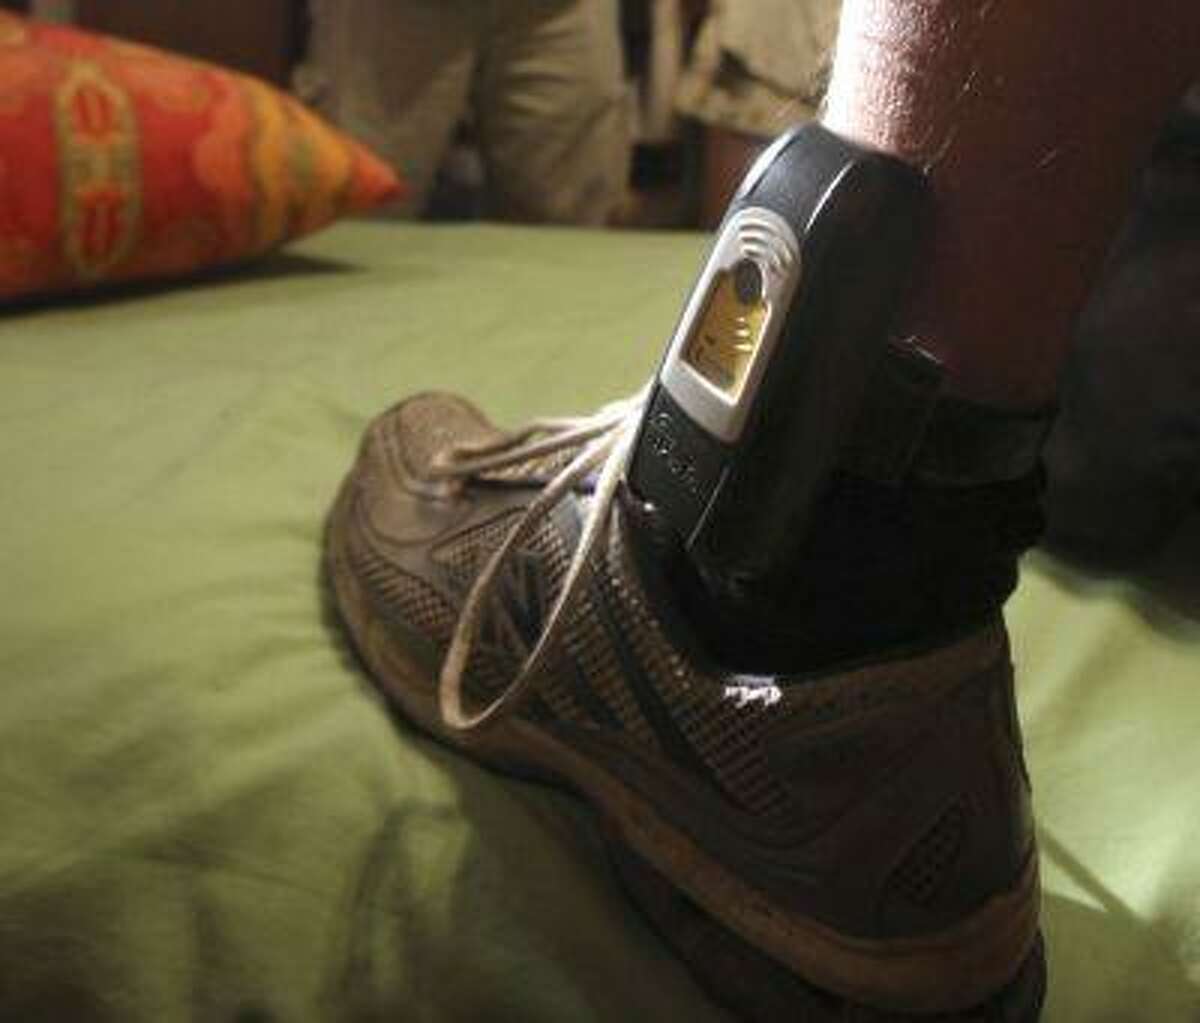 In this Aug. 3, 2009, file photo, Parole Agent Steve Nakamura uses a flashlight to inspect a GPS locater worn on the ankle of a parolee in Rio Linda, Calif.